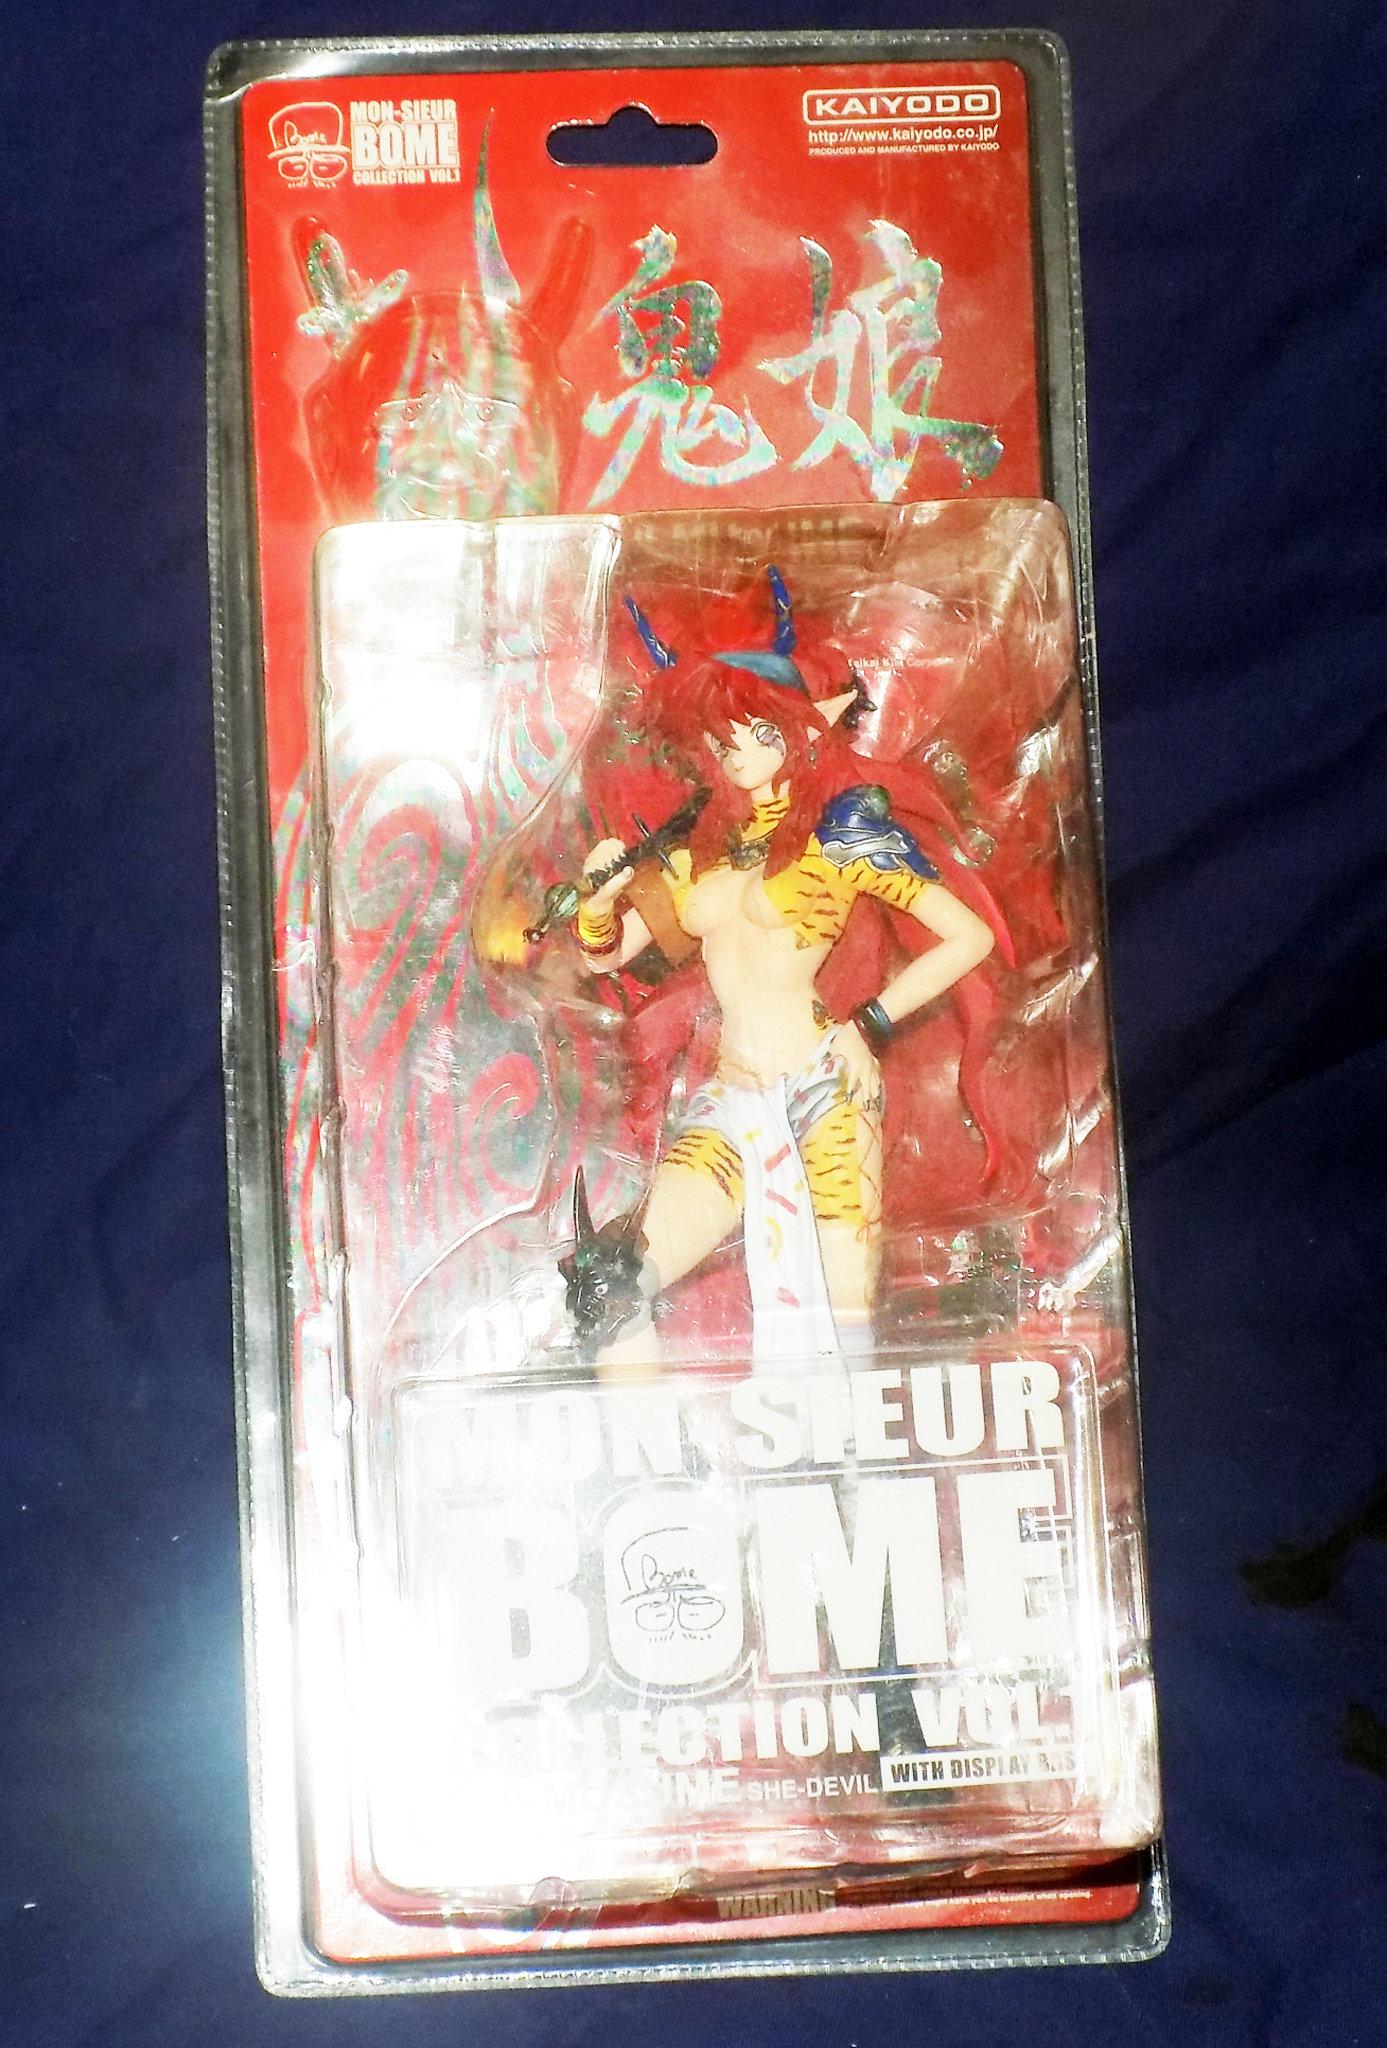 Mon Sieur Bome Collection Vol. 1 - She Devil With Display Base